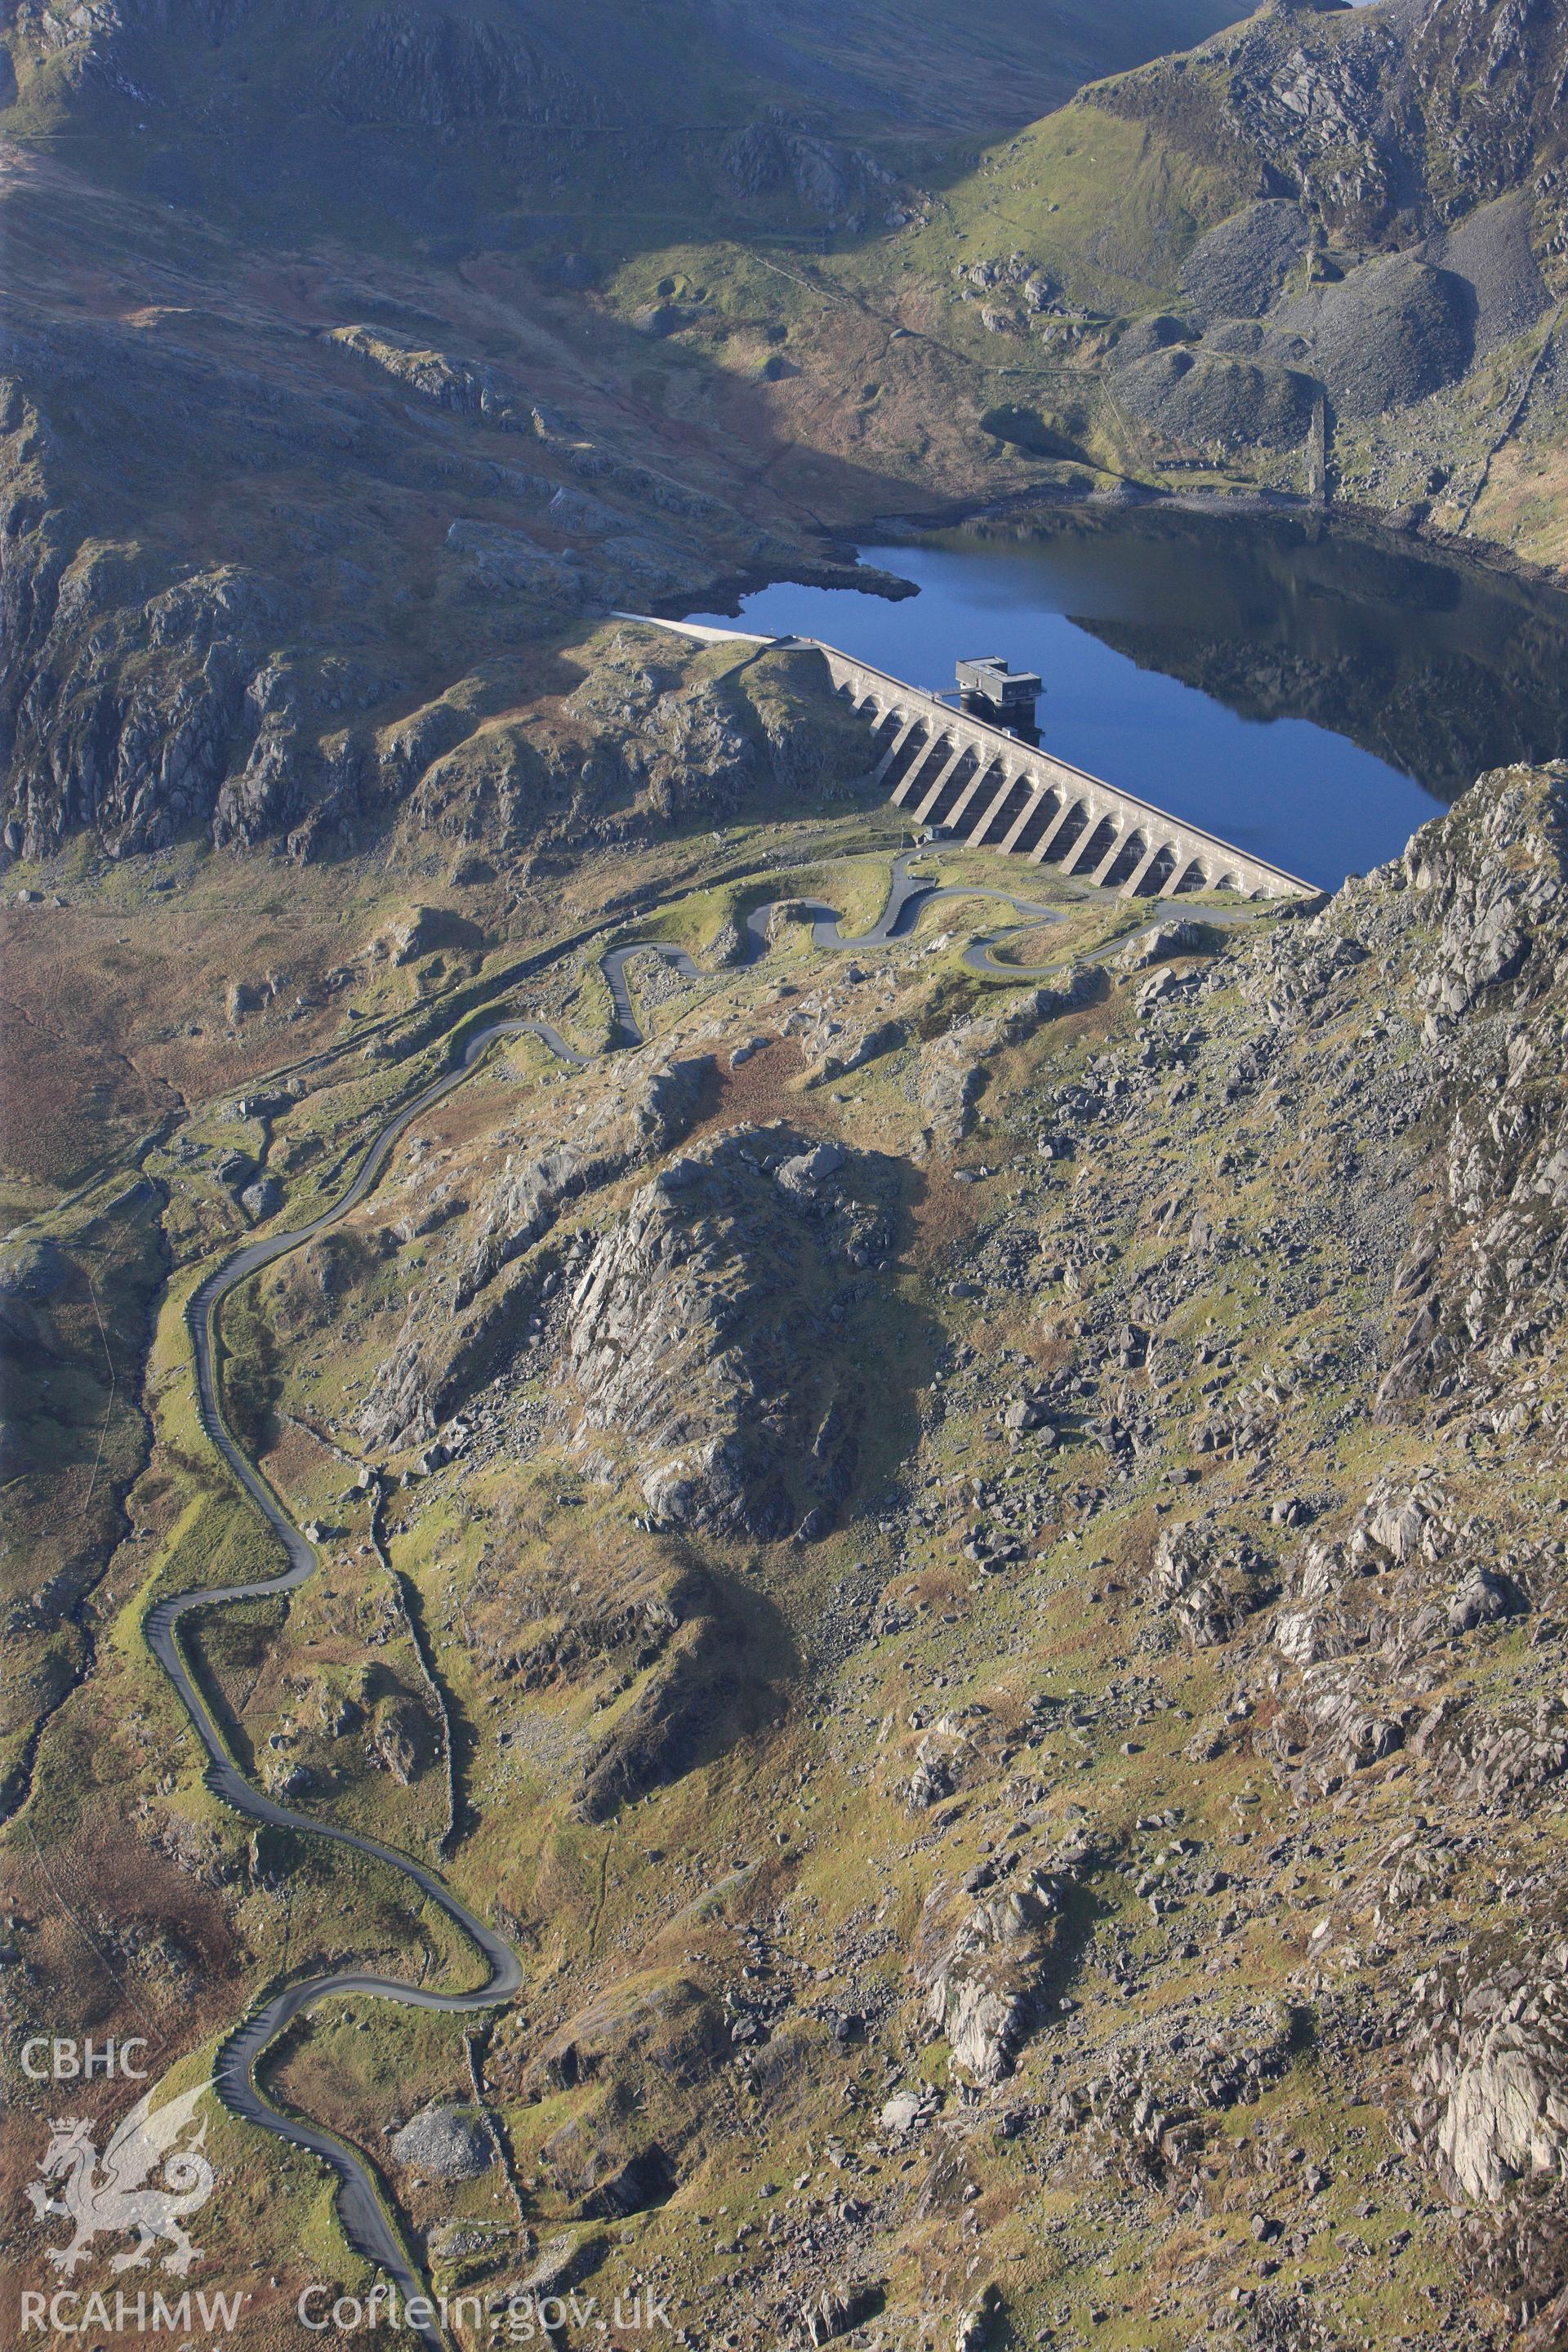 RCAHMW colour oblique photograph of Llyn Stwlan reservoir, with Moelwyn slate quarry. Taken by Toby Driver on 13/01/2012.